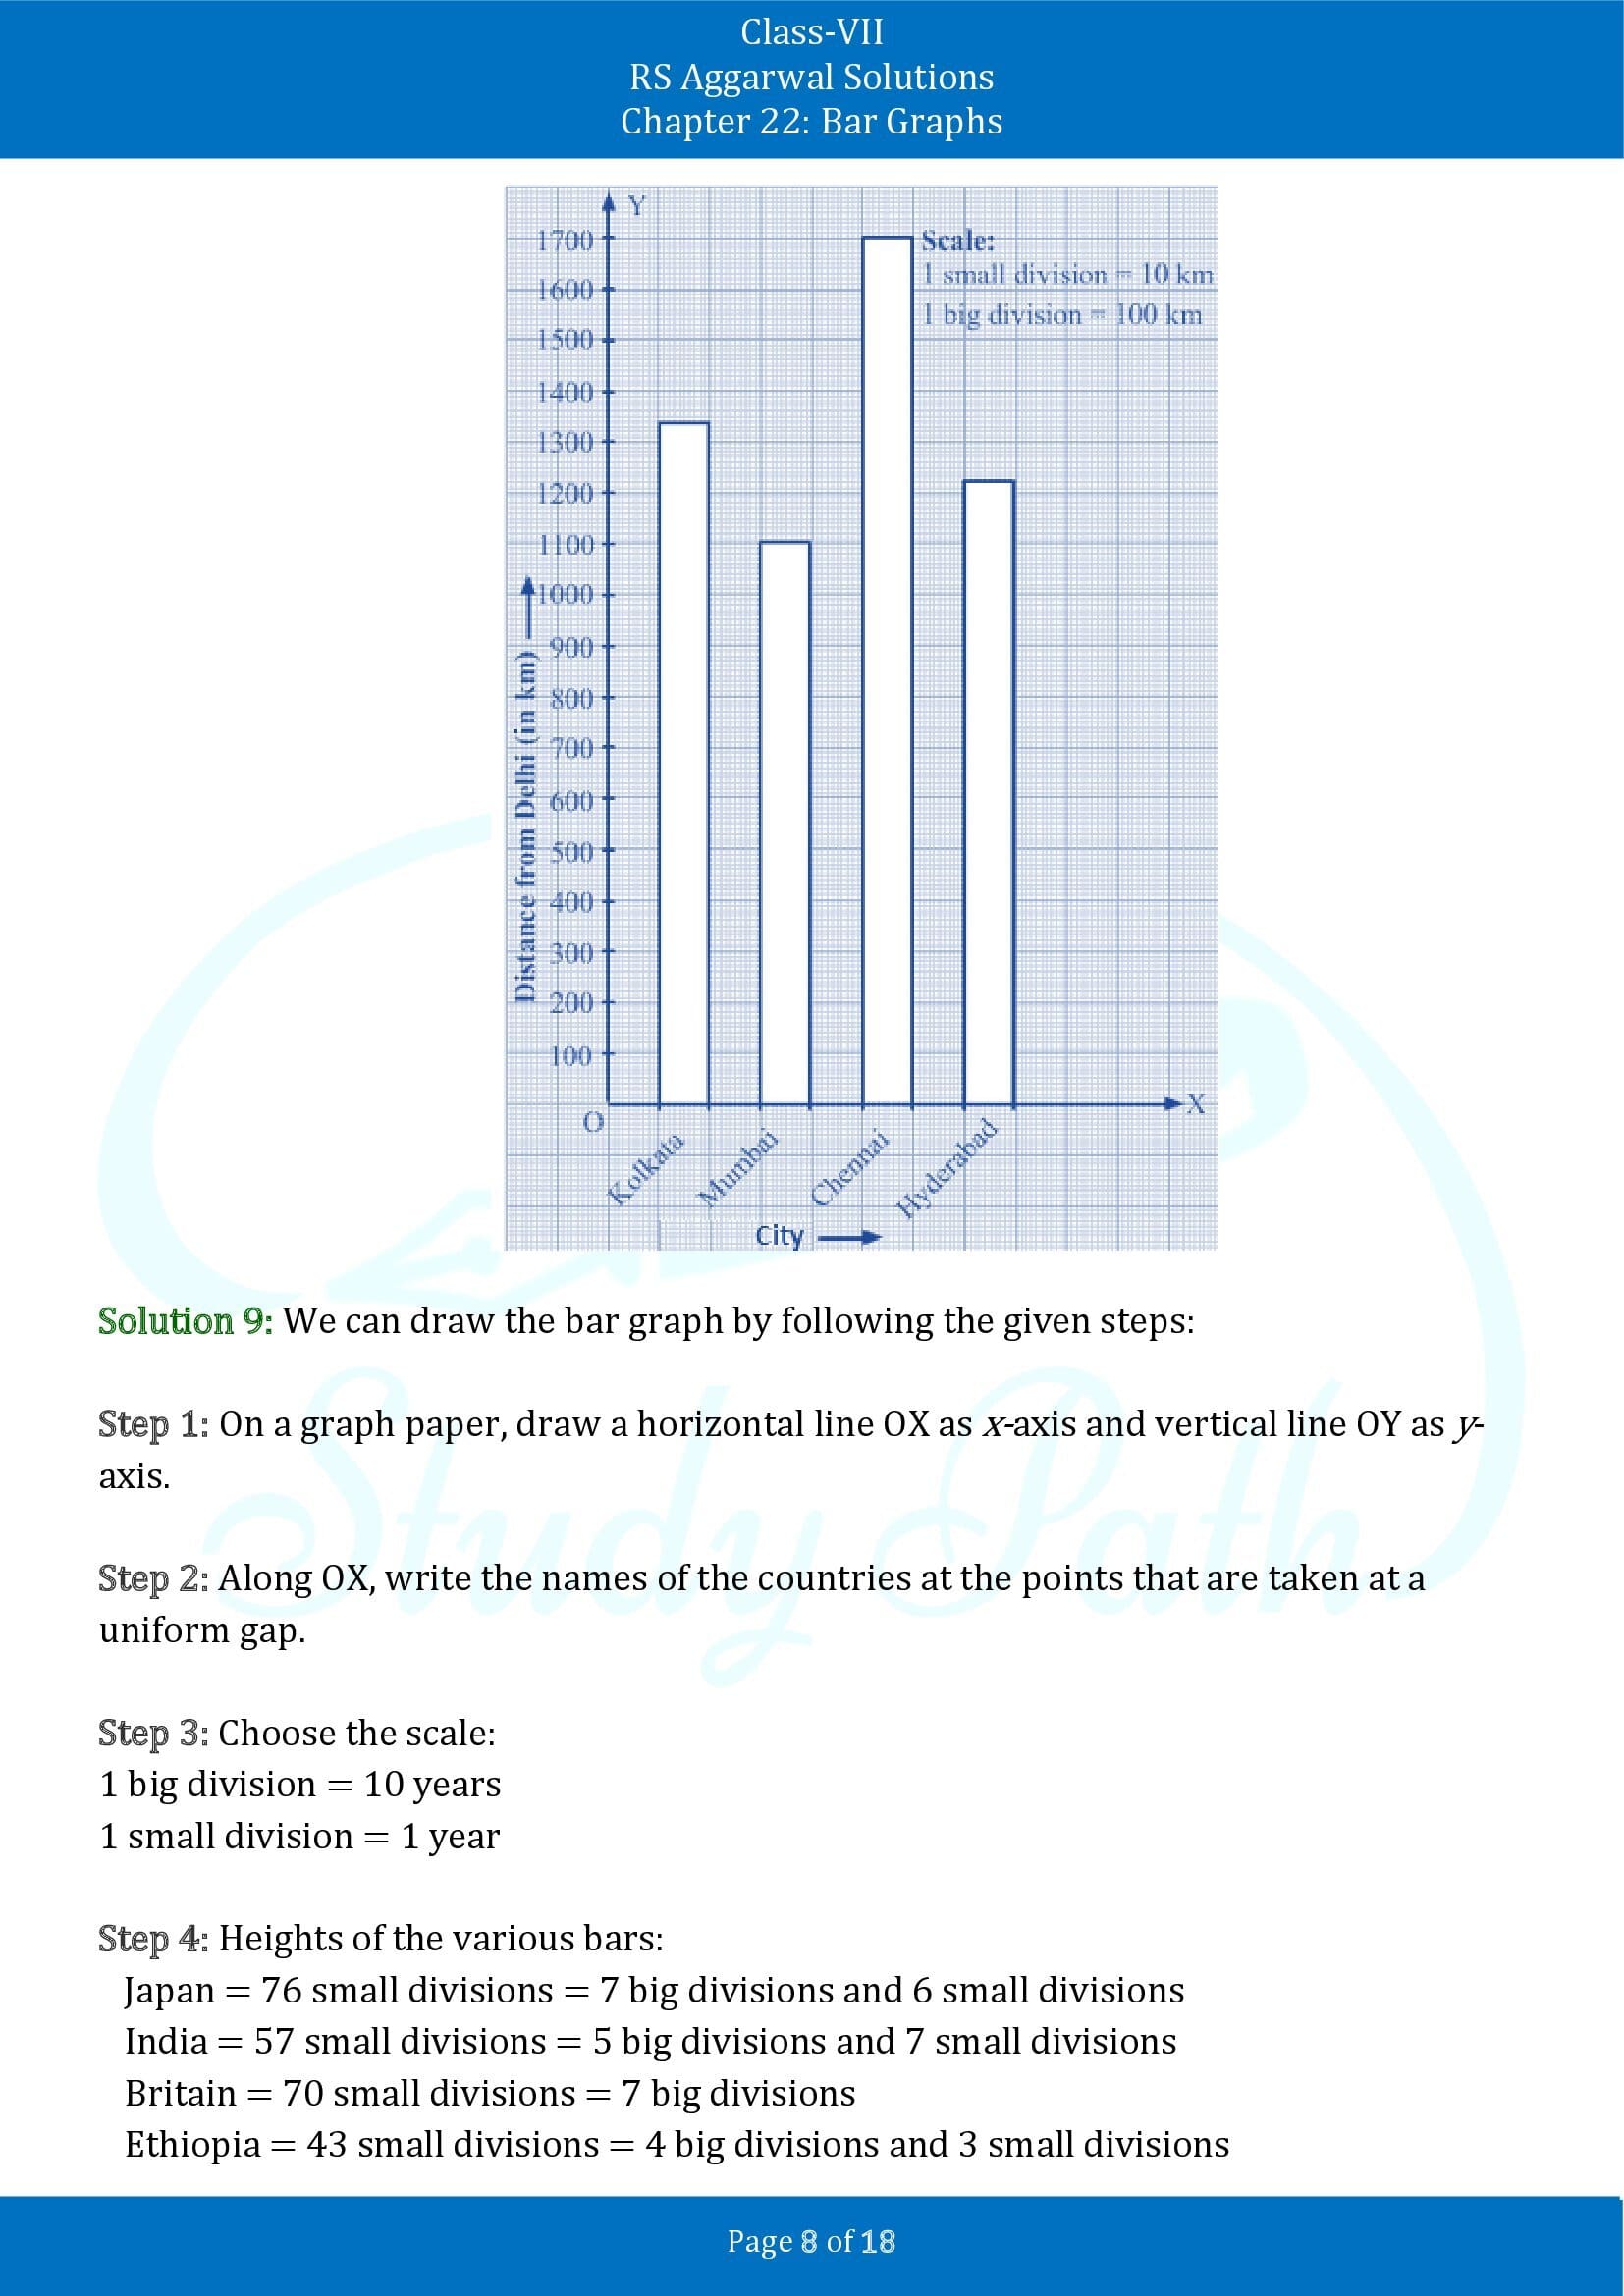 RS Aggarwal Solutions Class 7 Chapter 22 Bar Graphs 00008